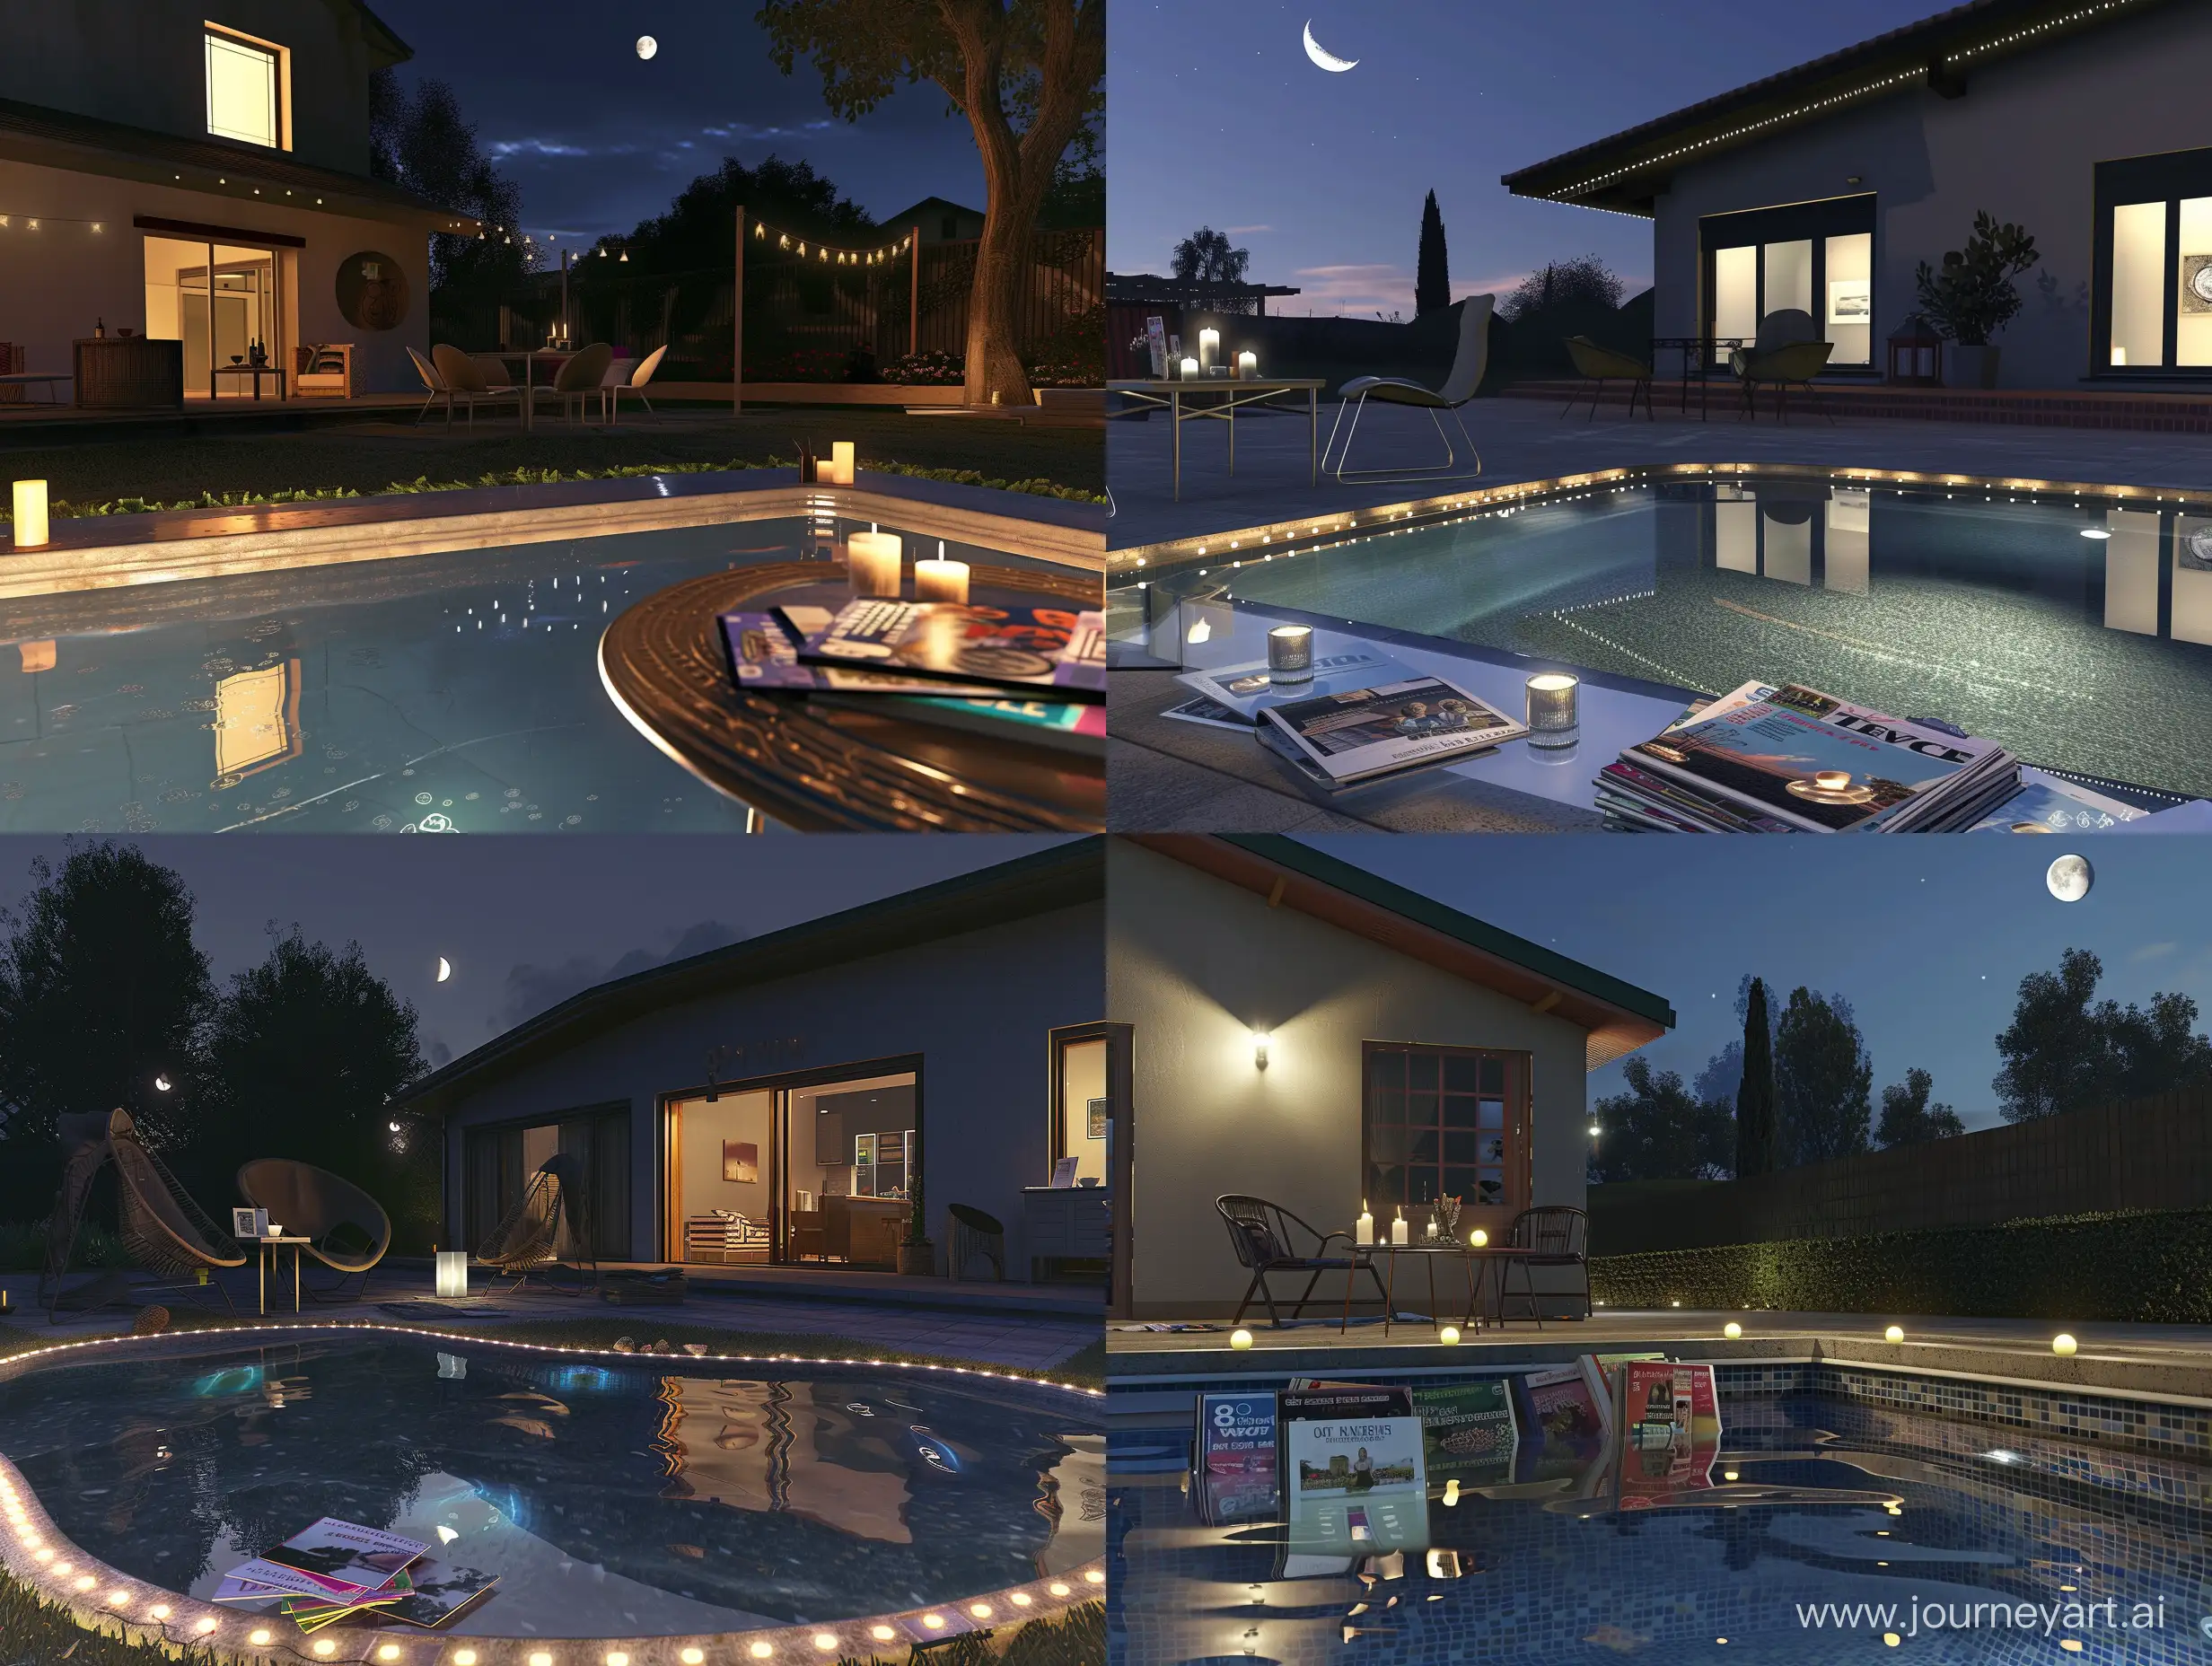 Elegant-Nighttime-Ambiance-Tranquil-American-Home-with-Illuminated-Pool-and-Designer-Decor